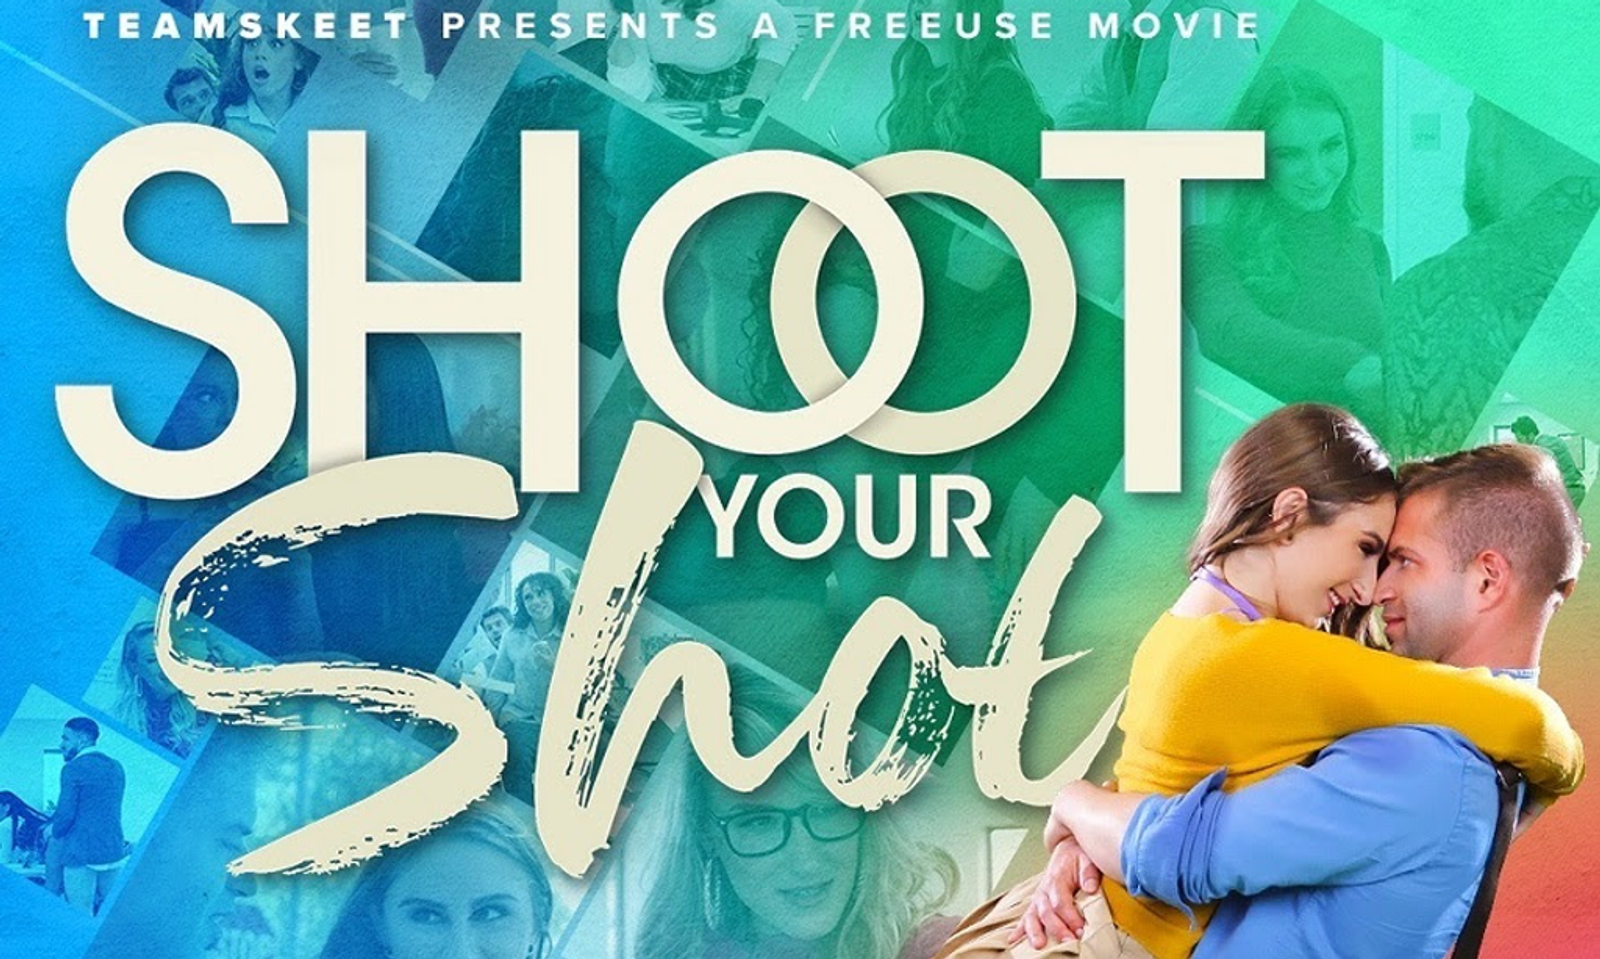 Team Skeet Releases Free Non-Sex Version of 'Shoot Your Shot'